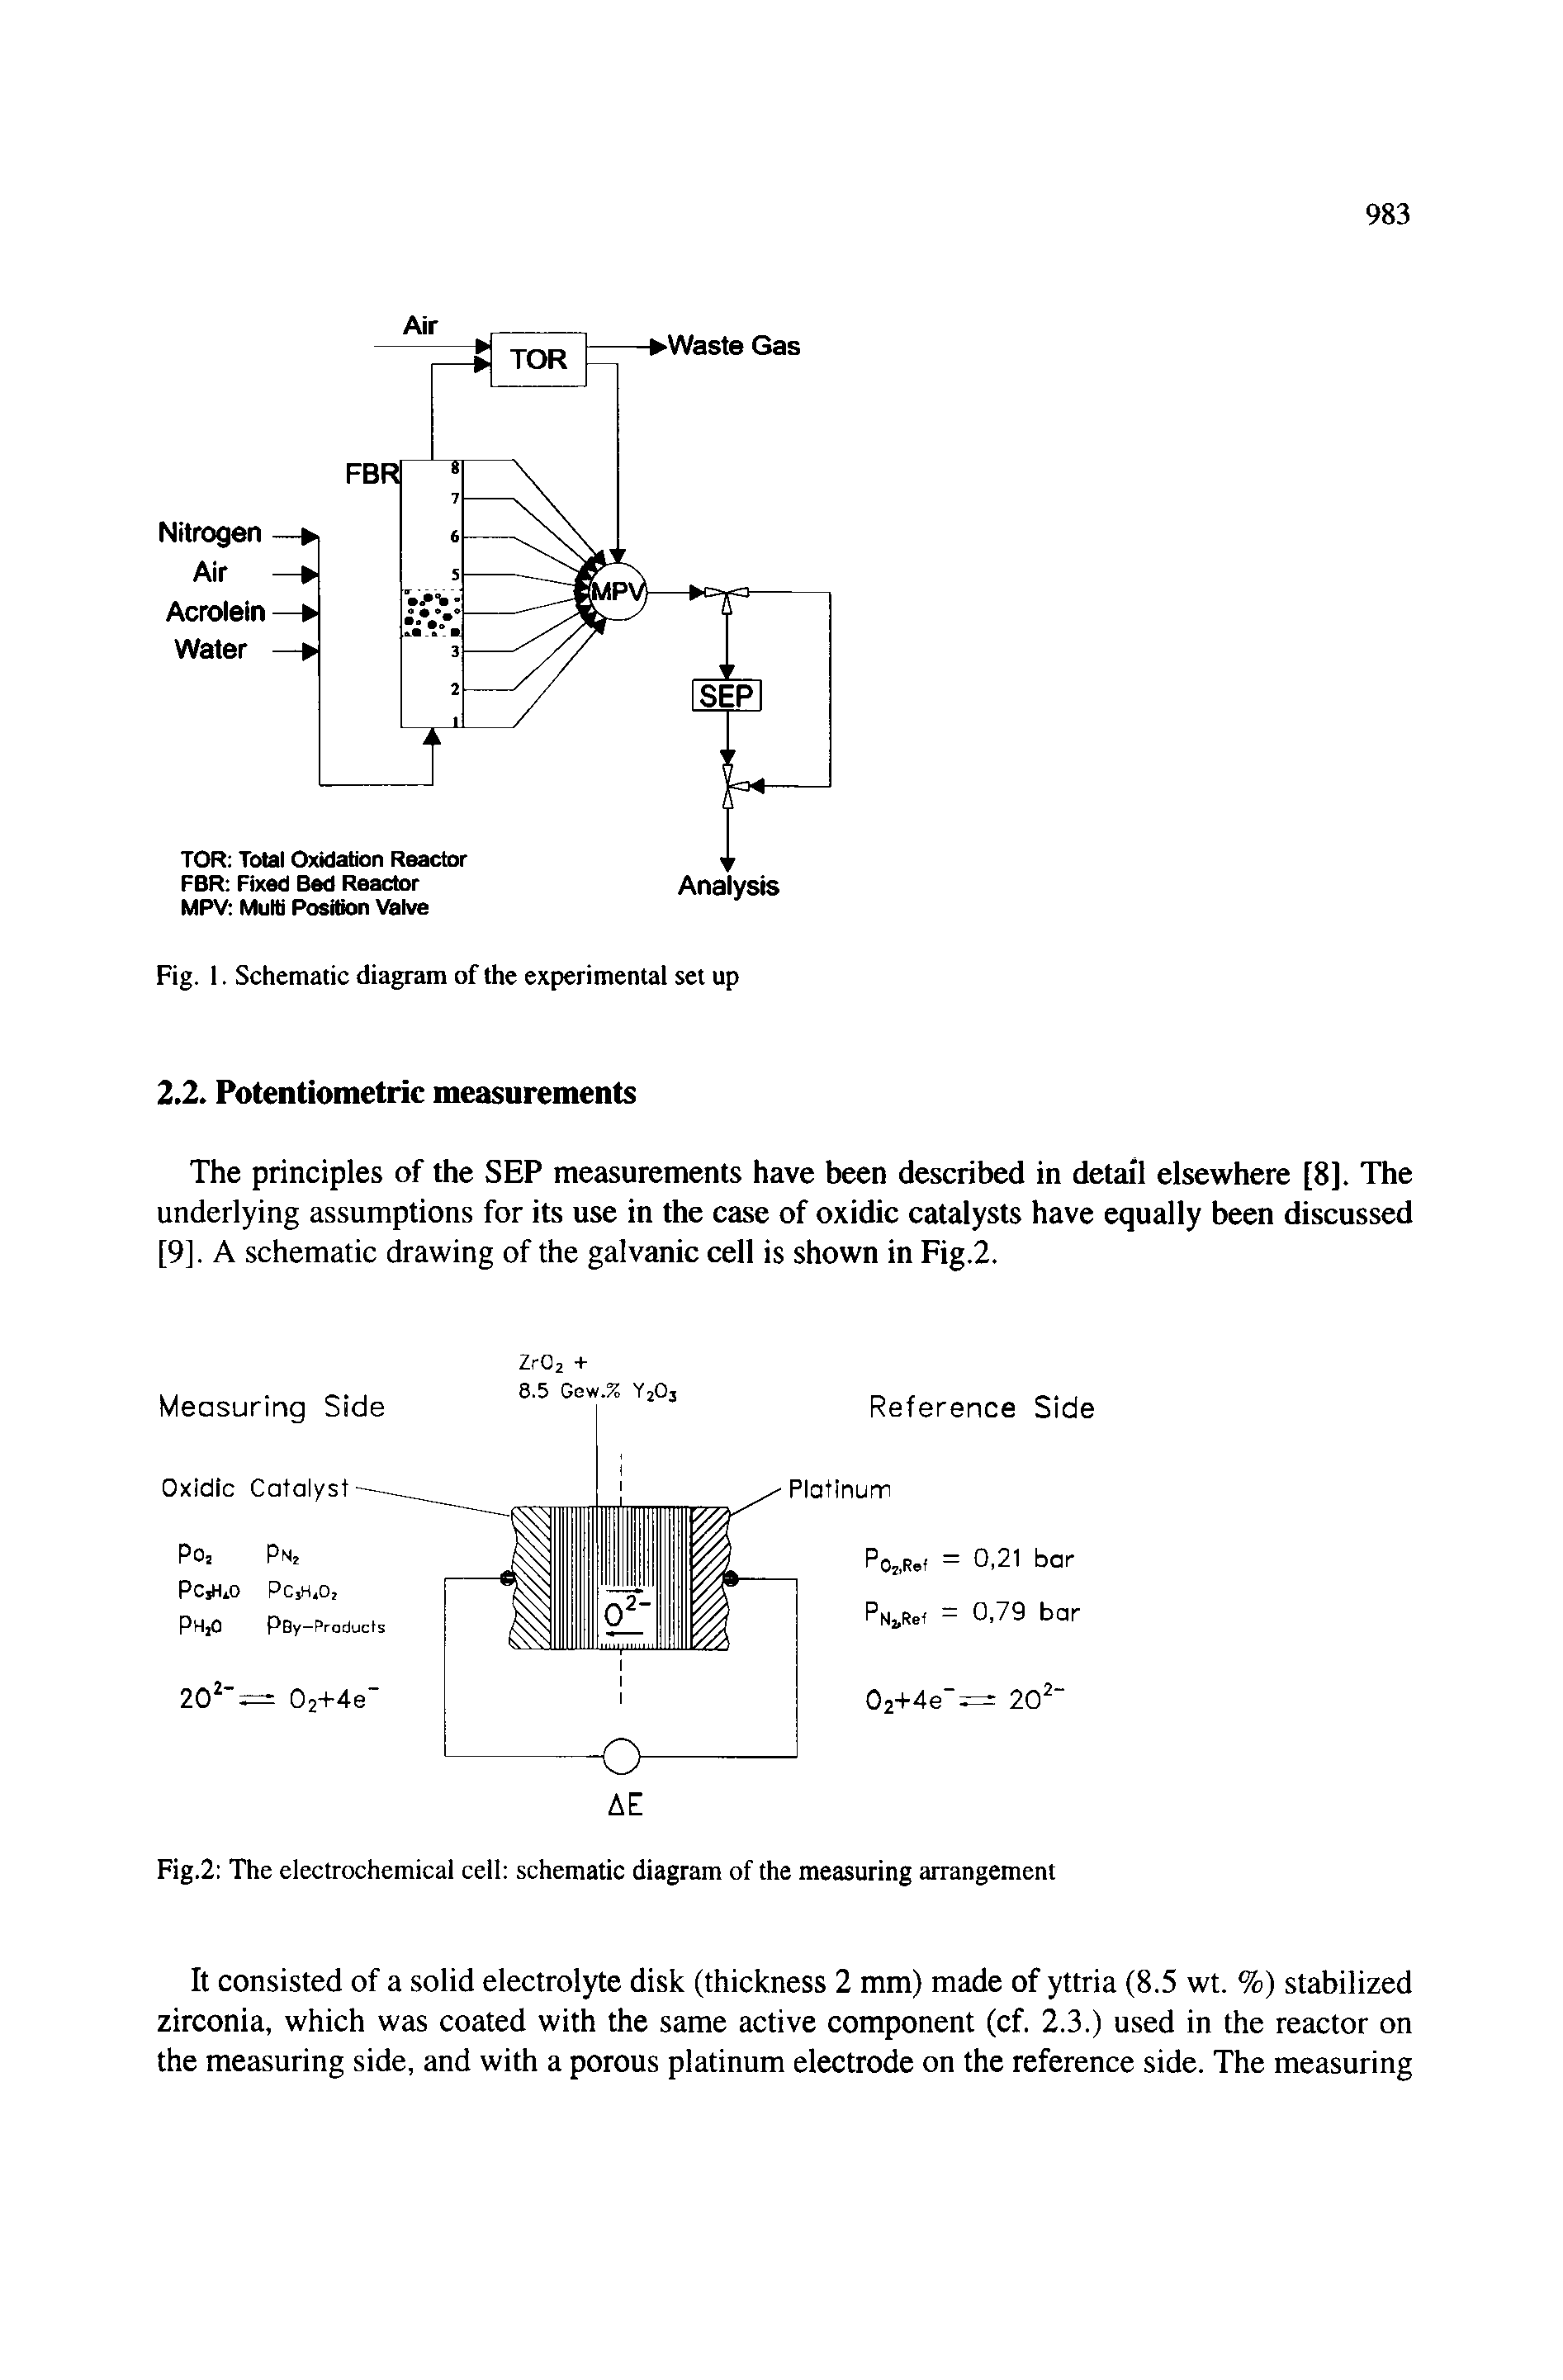 Fig.2 The electrochemical cell schematic diagram of the measuring arrangement...